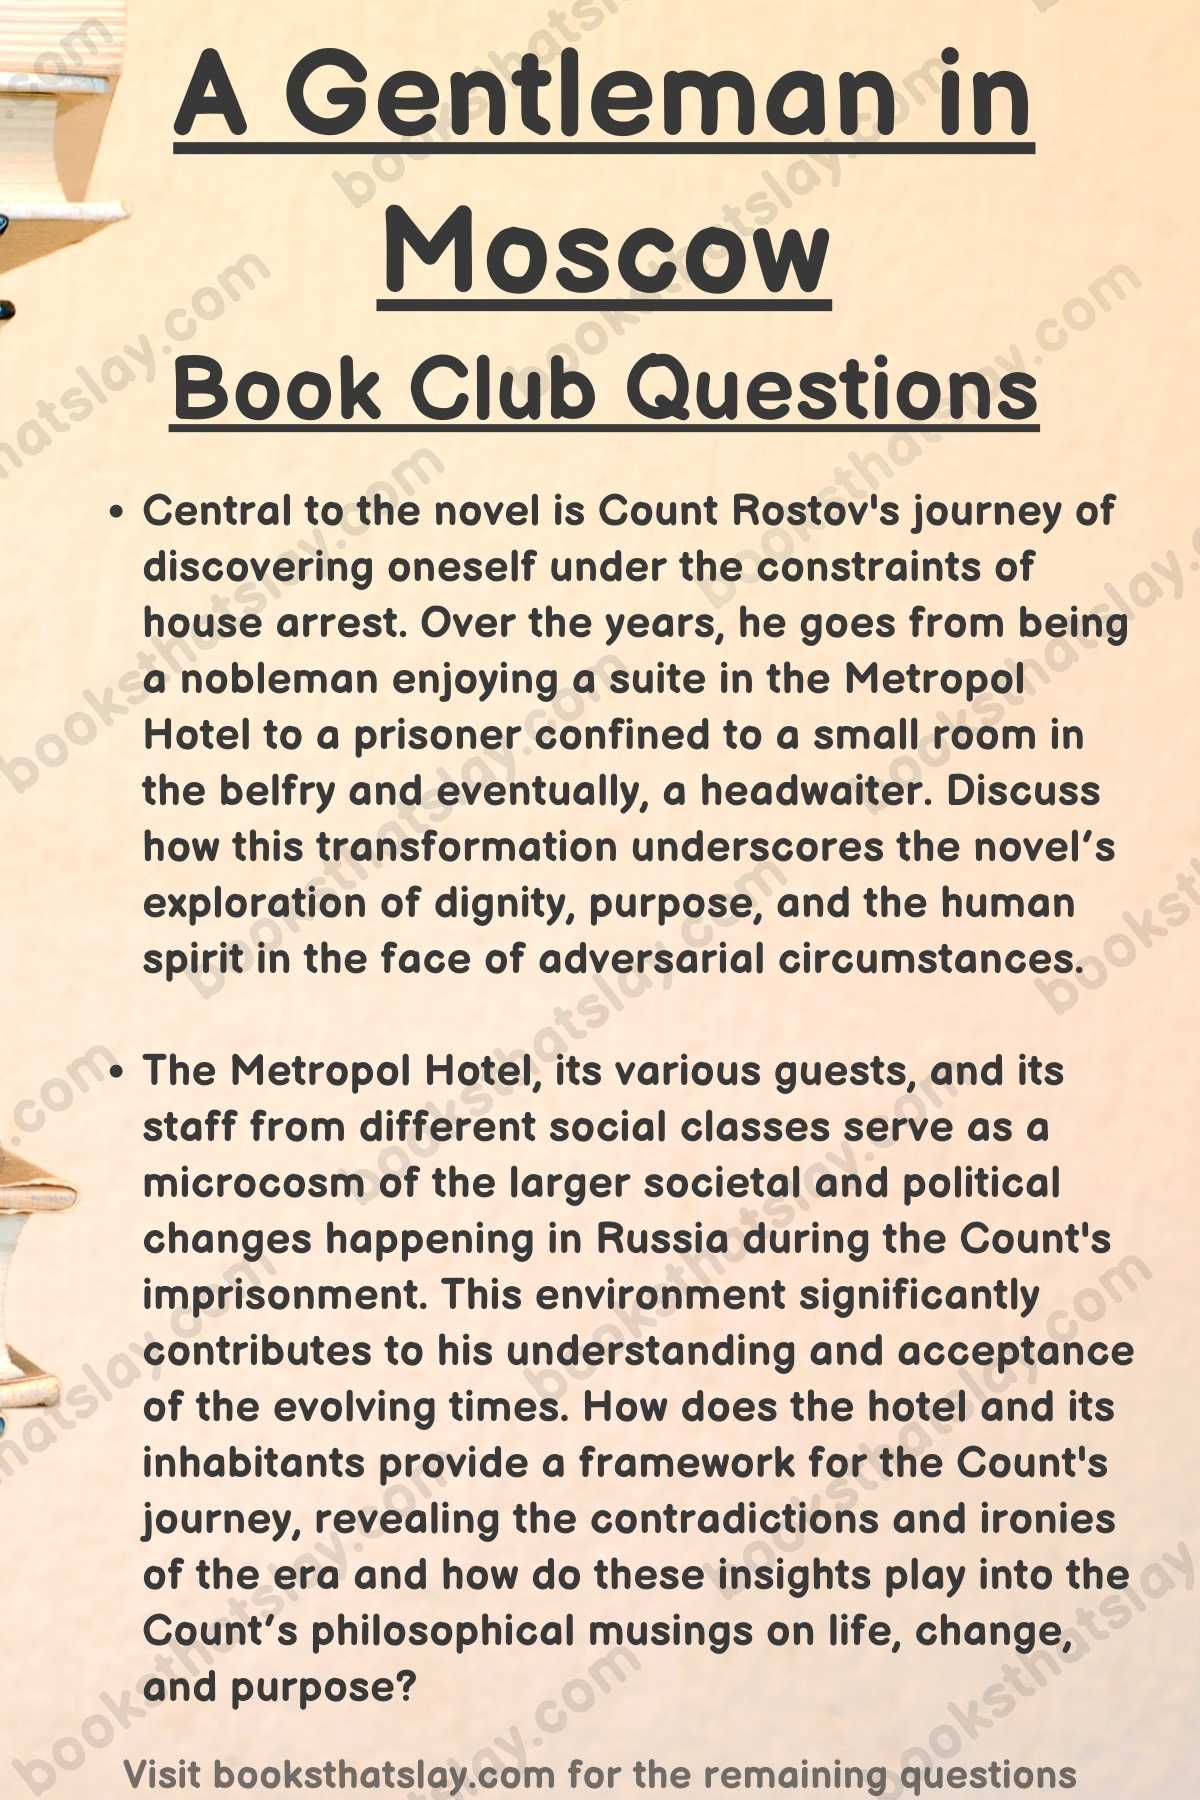 a gentleman in moscow book club questions infographic